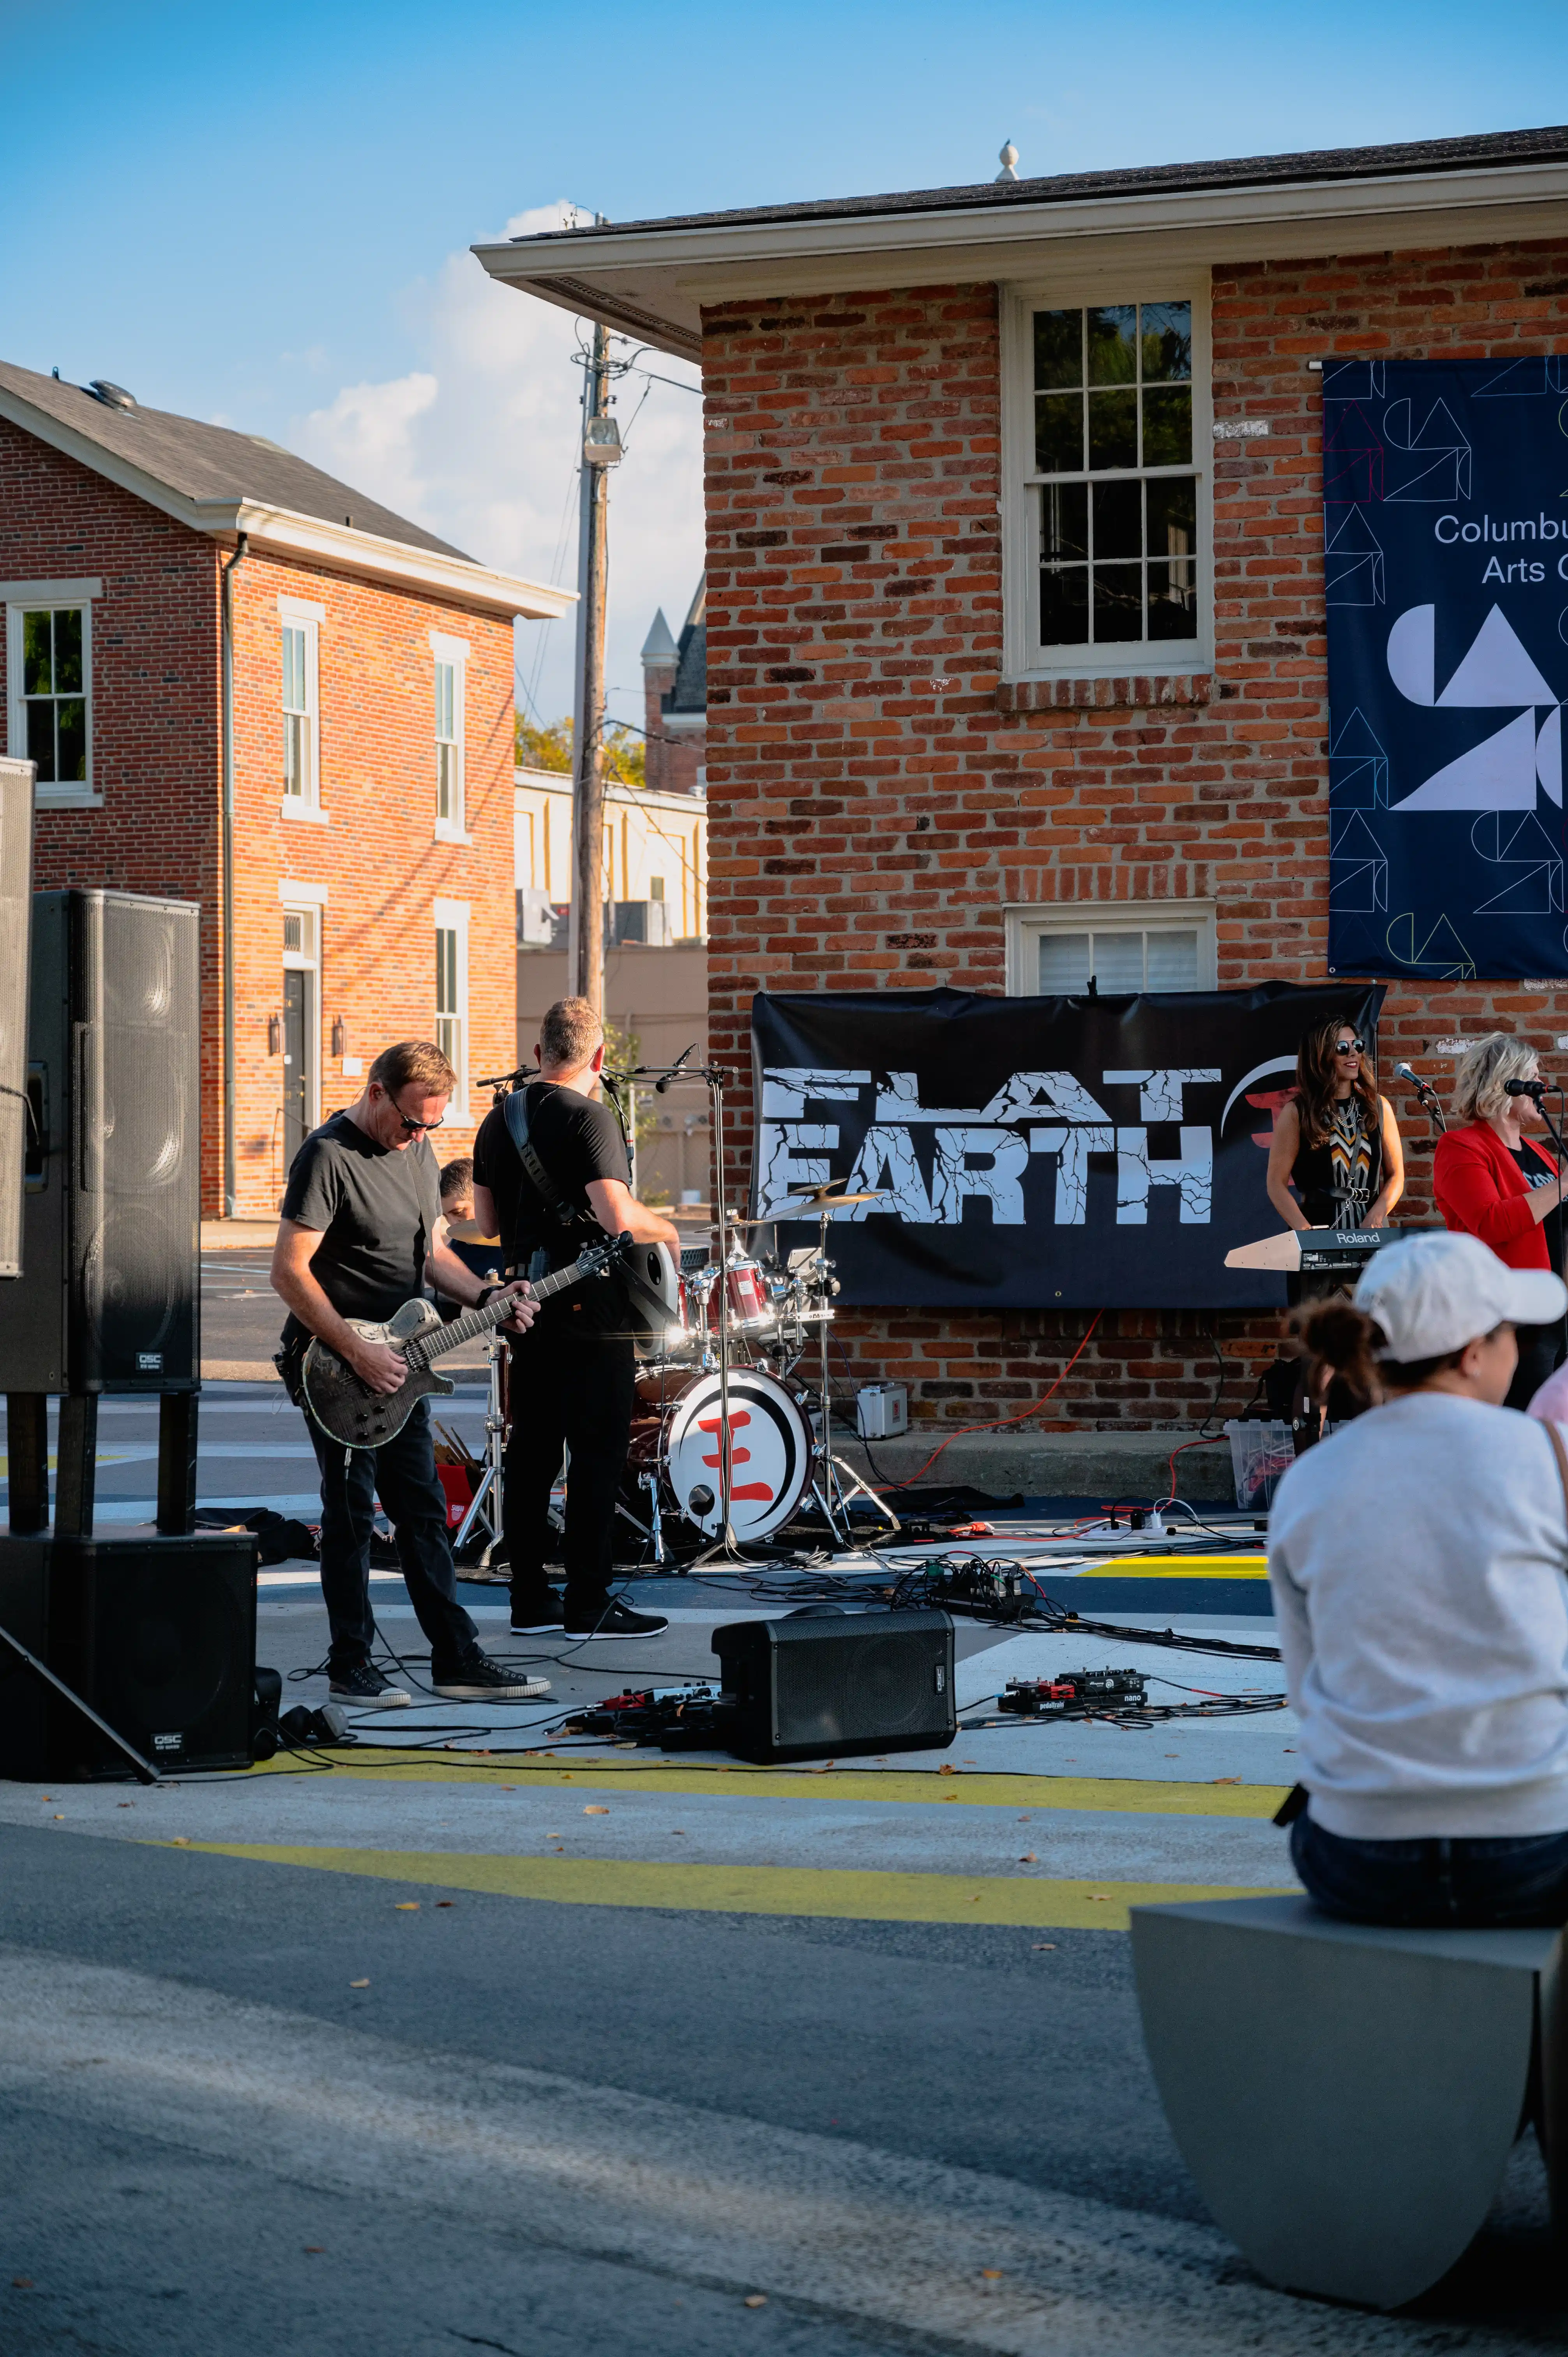 A local band performing at an outdoor event with a banner reading "FLAT EARTH" in the background, spectators in the foreground, and brick buildings under a clear sky.